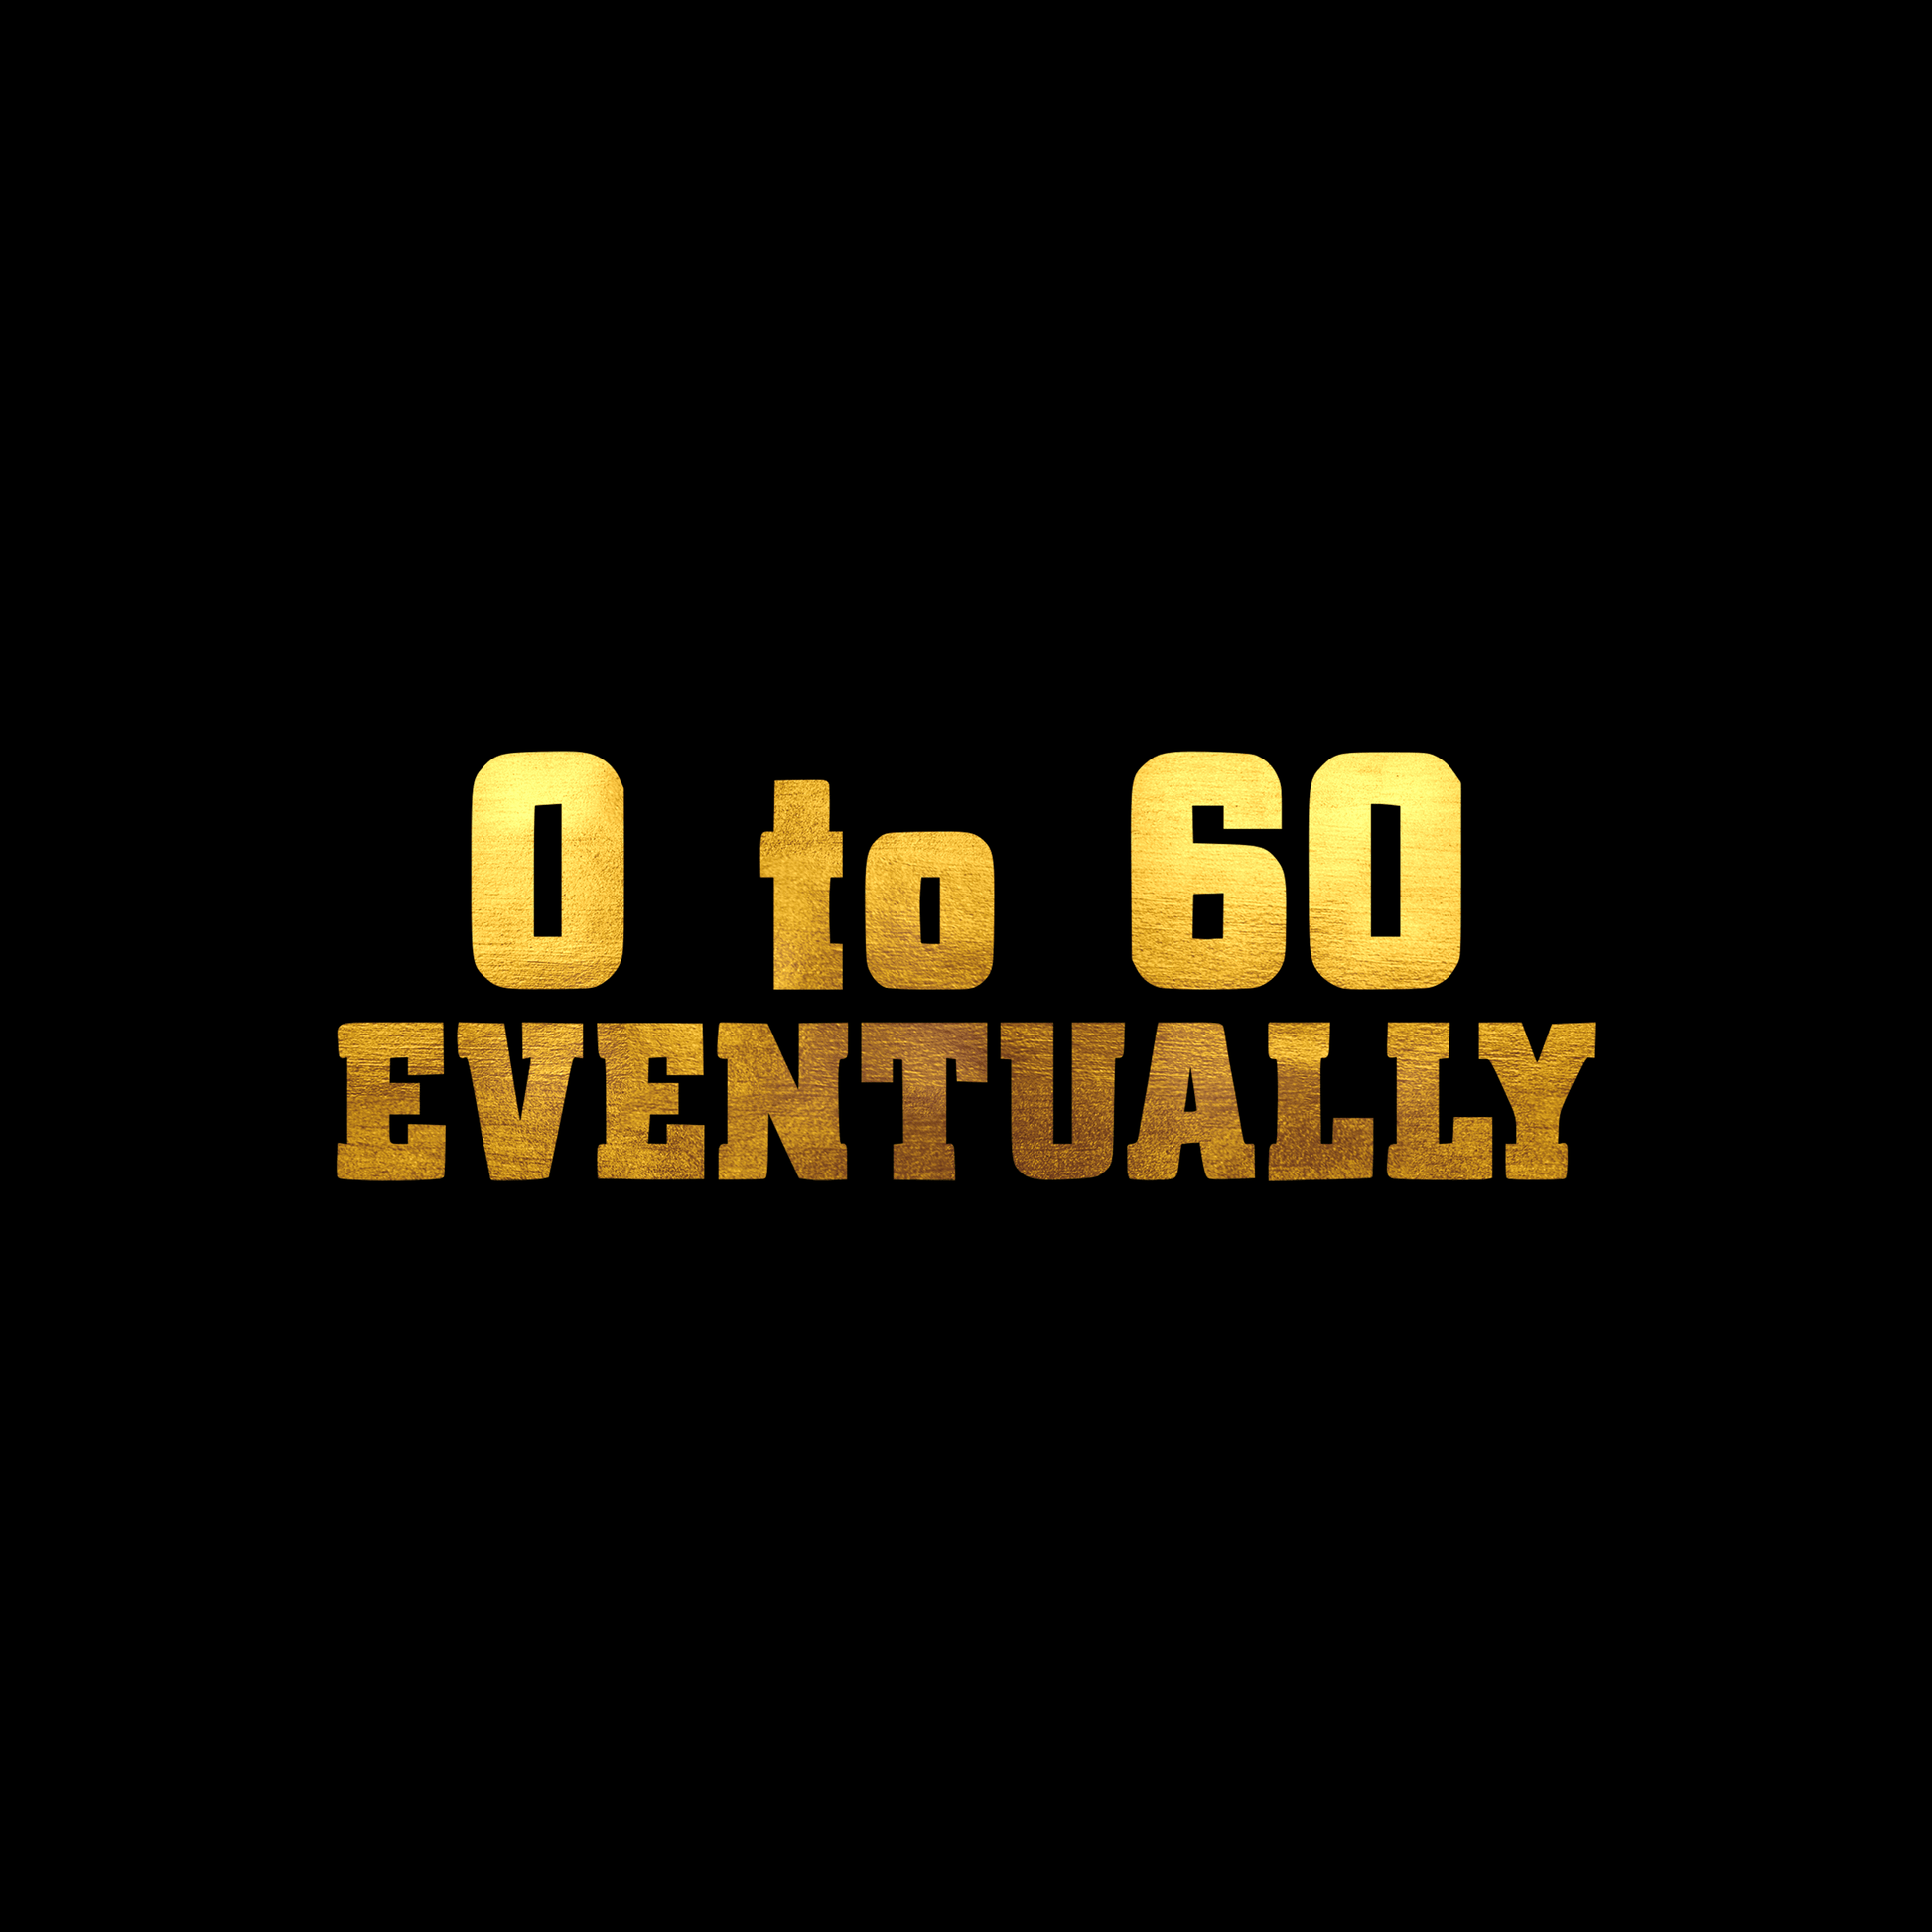 0 to 60 eventually sticker decal